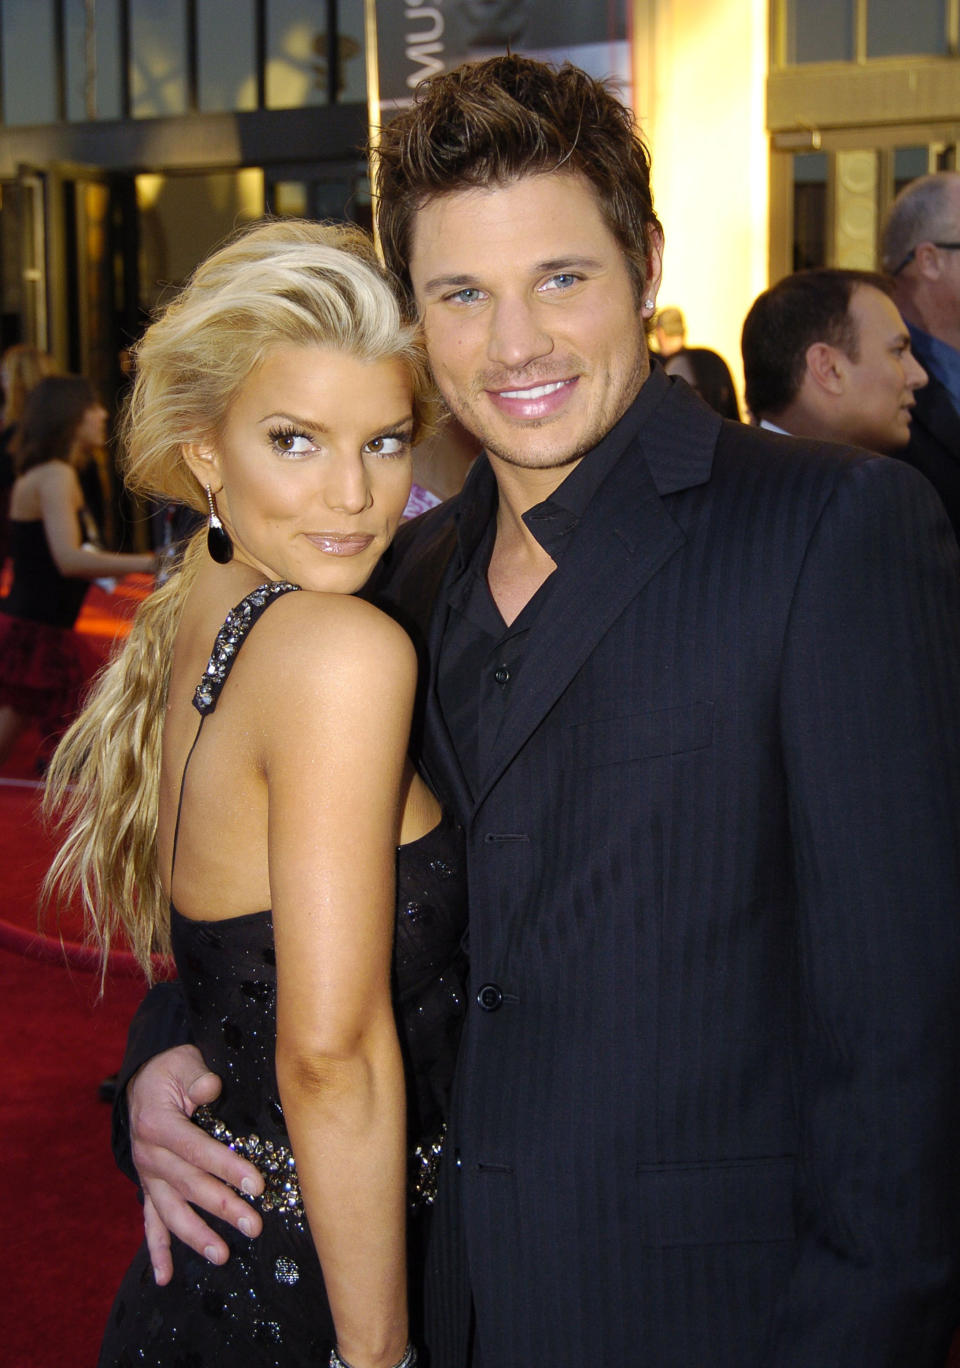 On the red carpet, he's smiling and has his arm around her waist; she's wearing a shiny sleeveless, low-back outfit